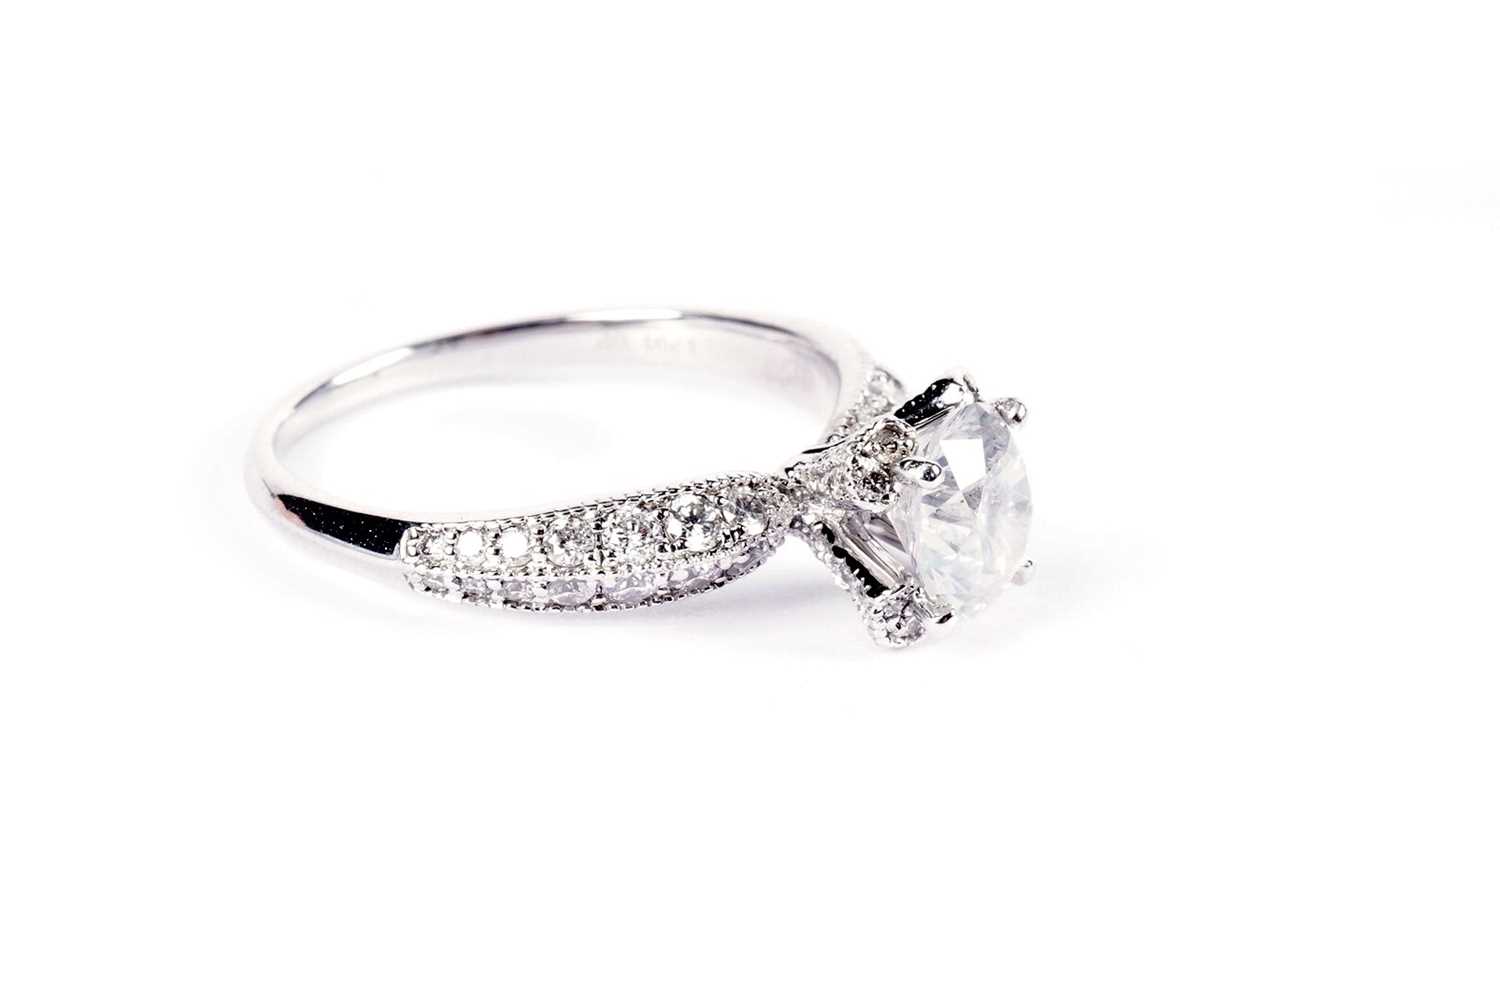 A solitaire diamond ring - Image 4 of 9